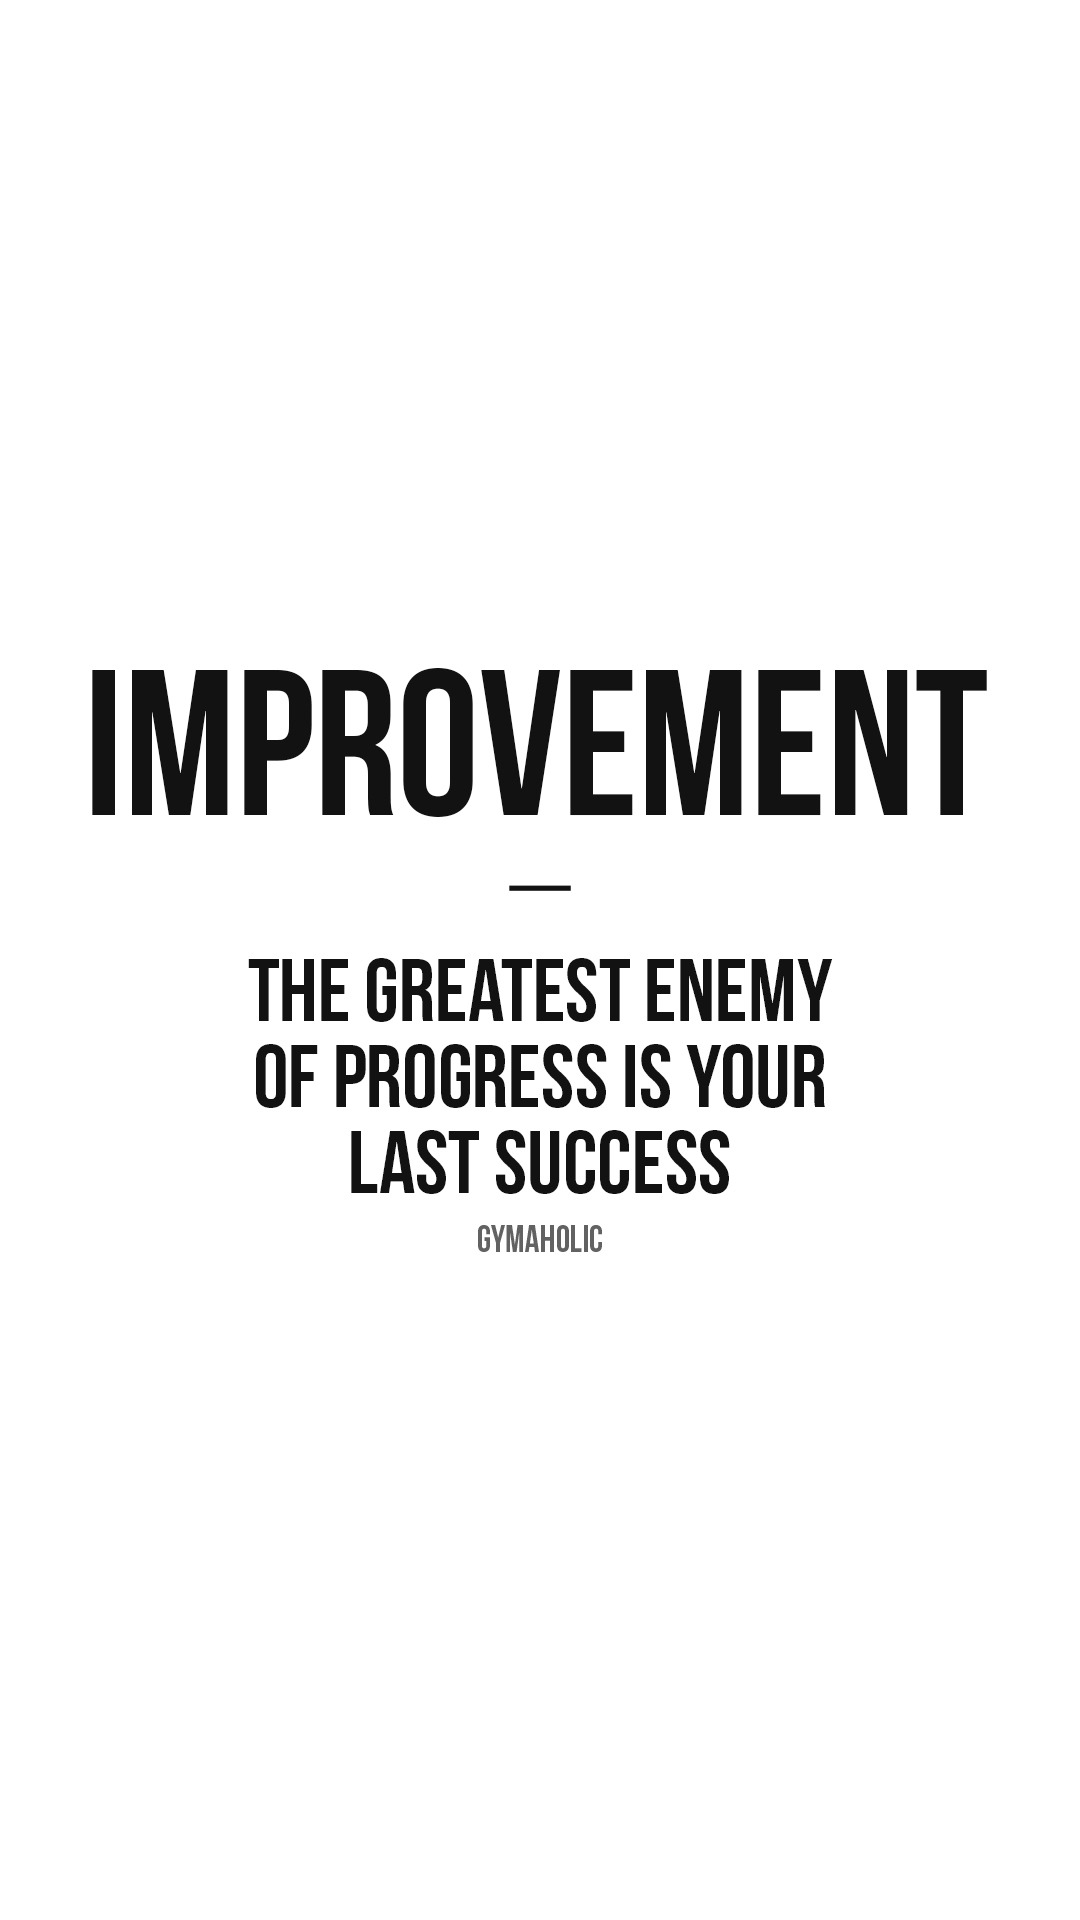 Improvement: the greatest enemy of progress is your last success